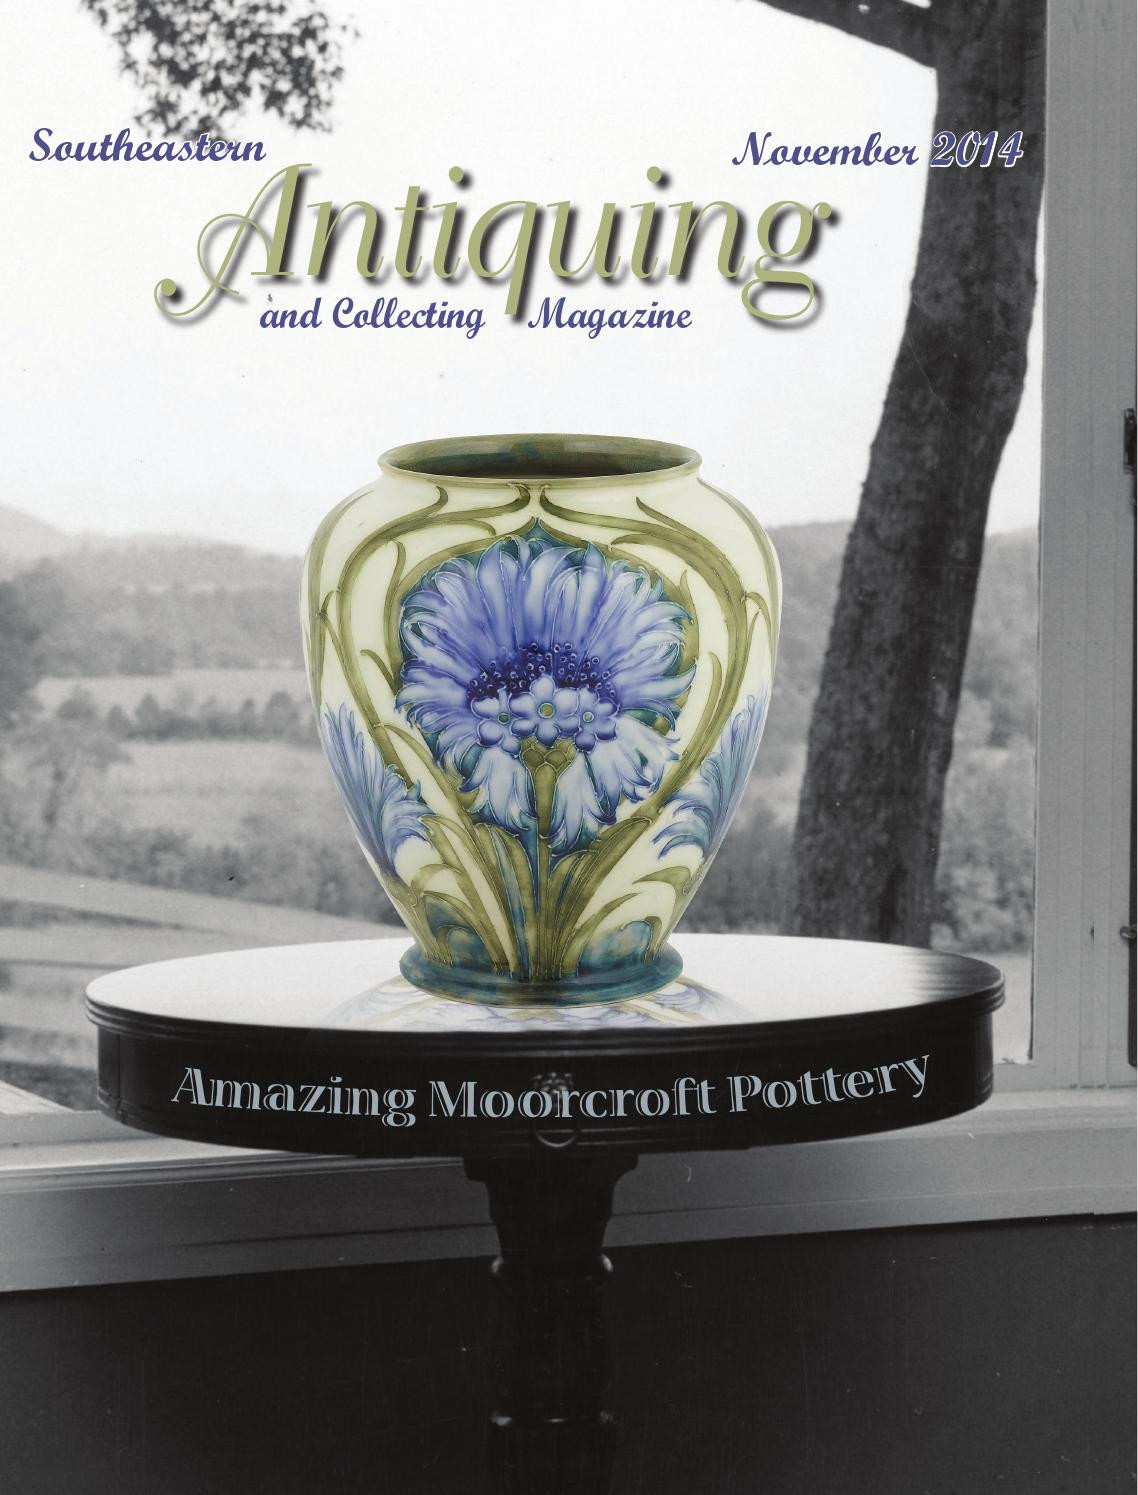 19 Recommended Lenox Bud Vase Gold Trim 2024 free download lenox bud vase gold trim of southeastern antiquing and collecting magazine november 2014 by with regard to southeastern antiquing and collecting magazine november 2014 by southeastern antiqu